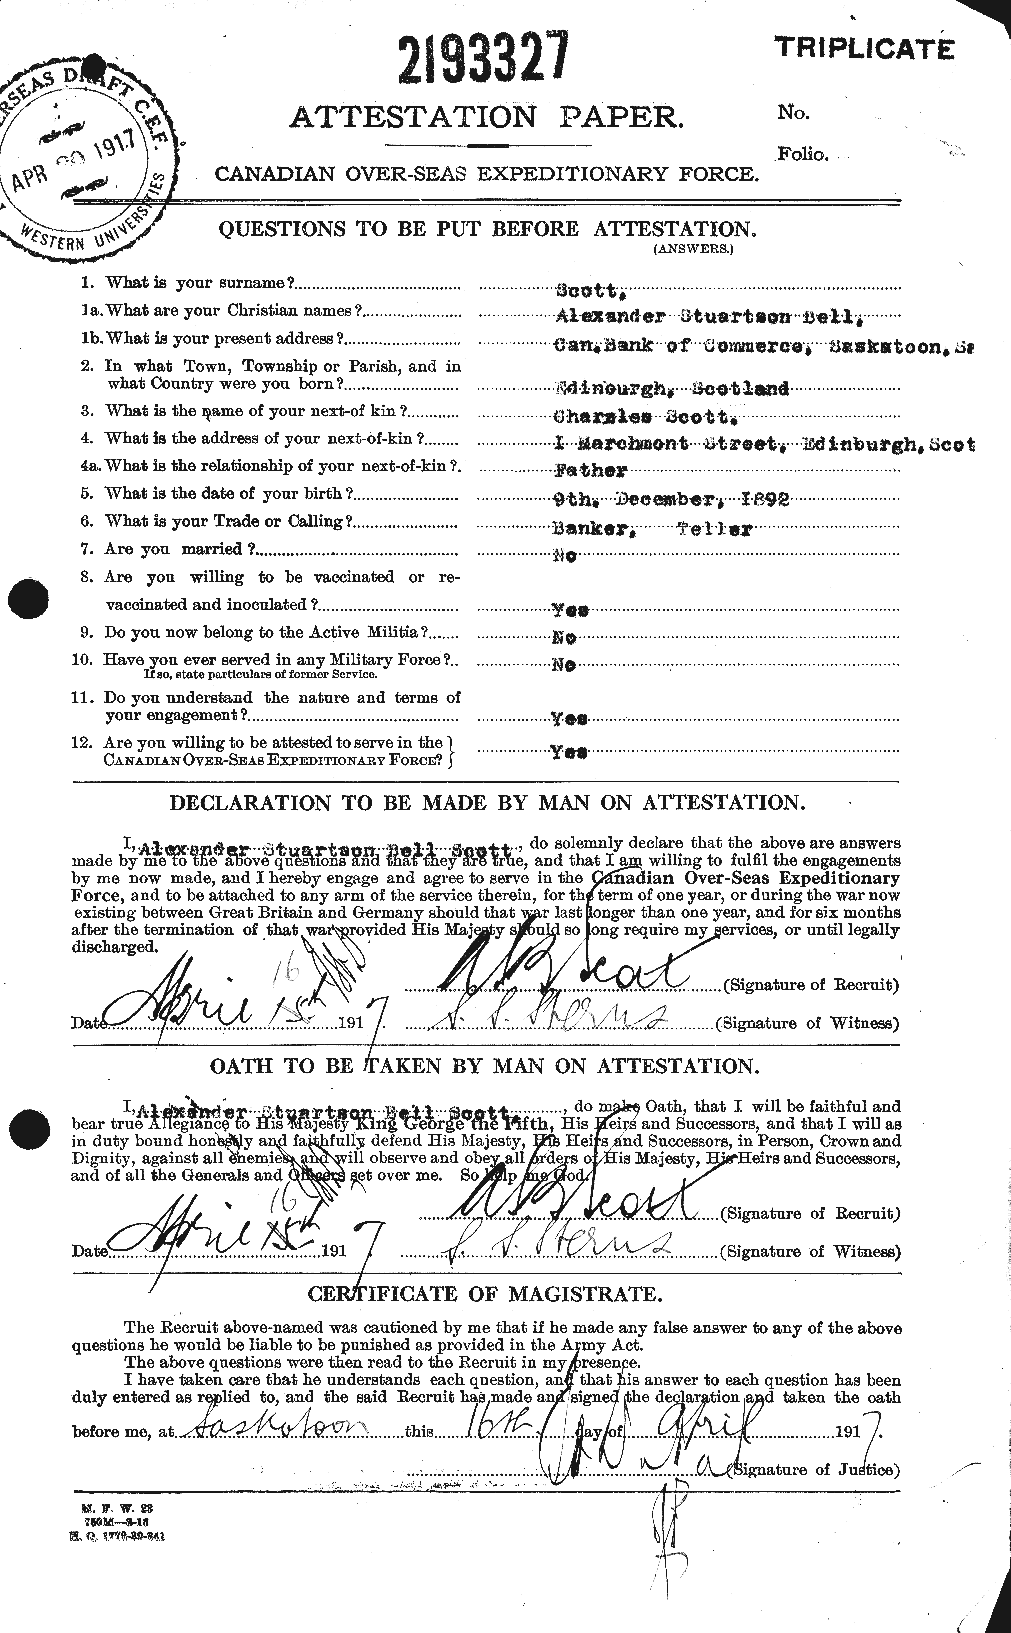 Personnel Records of the First World War - CEF 086592a